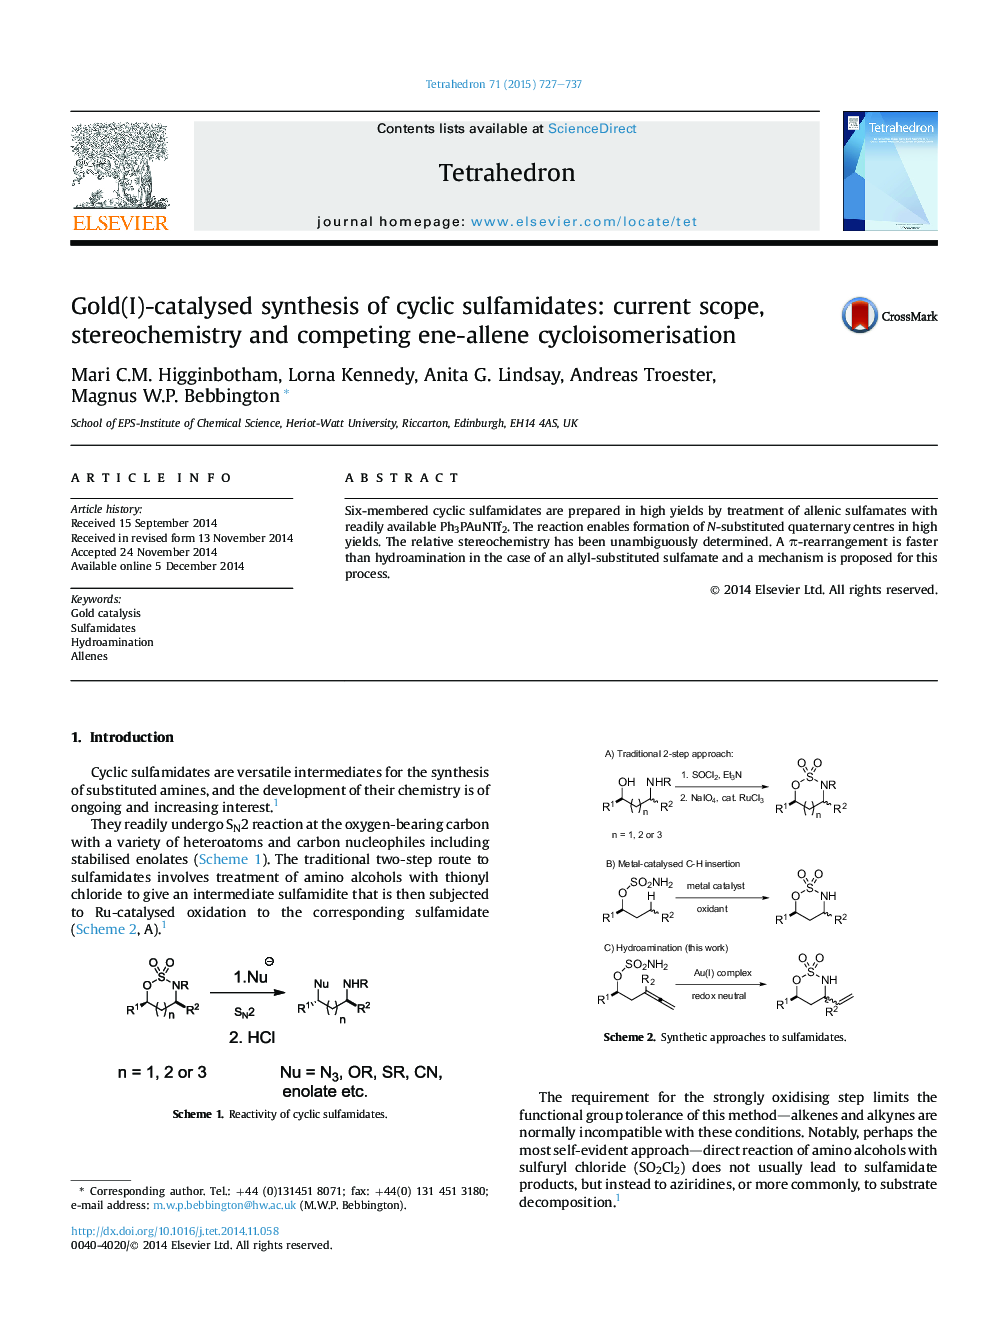 Gold(I)-catalysed synthesis of cyclic sulfamidates: current scope, stereochemistry and competing ene-allene cycloisomerisation